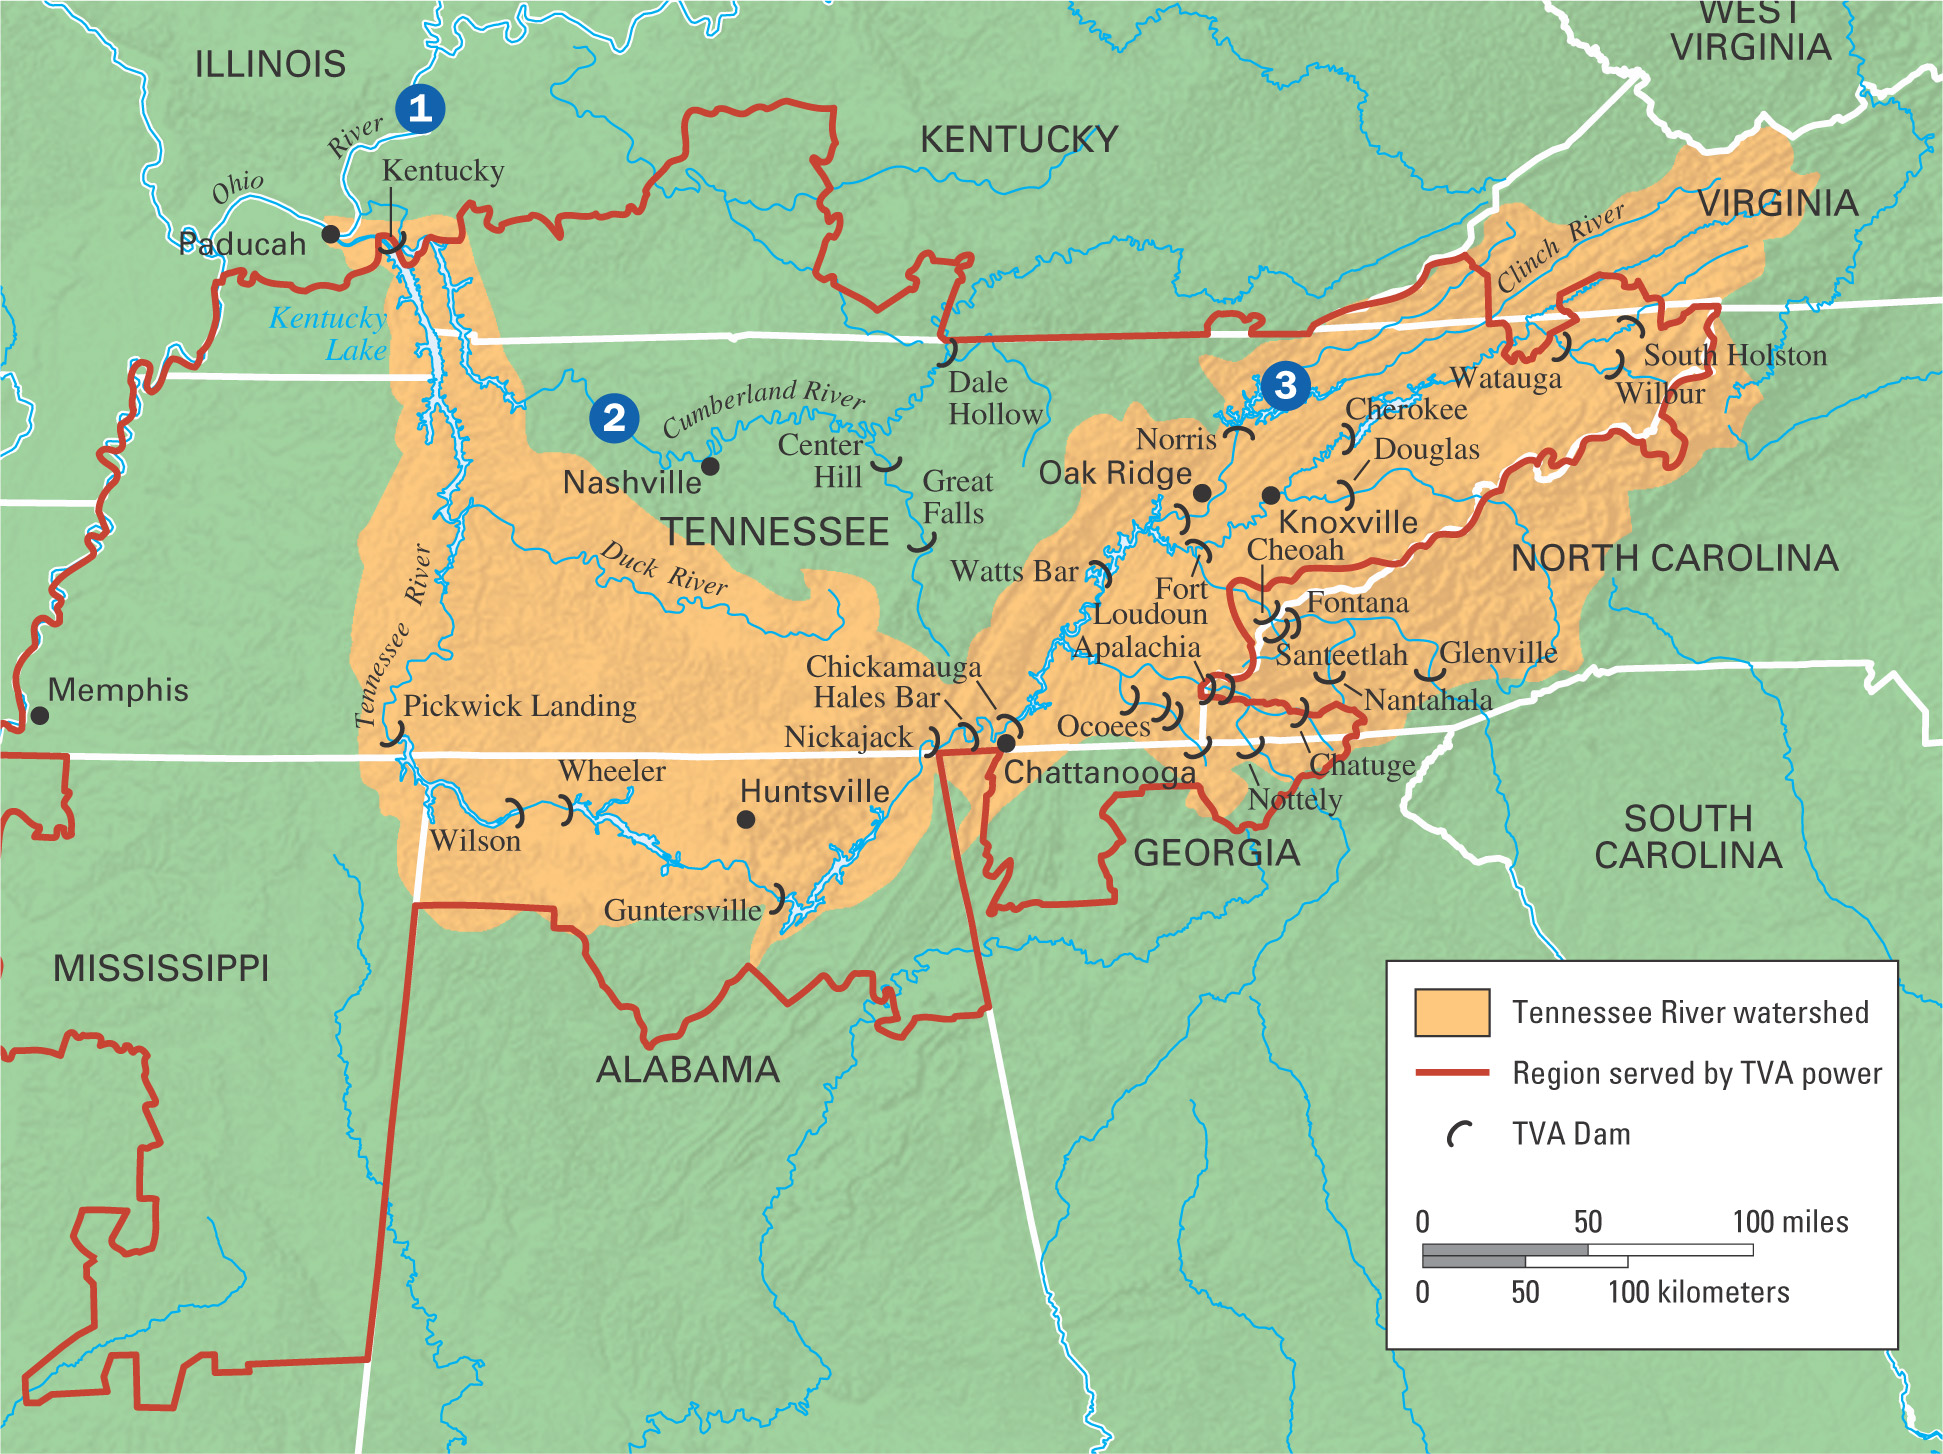 Map: shows the Tennessee River watershed, a wide area emcompassing primarily parts of Tennessee and North Carolina, the region served by TVA power, an area extending beyond the watershed into bordering states, and the location of three dams. 